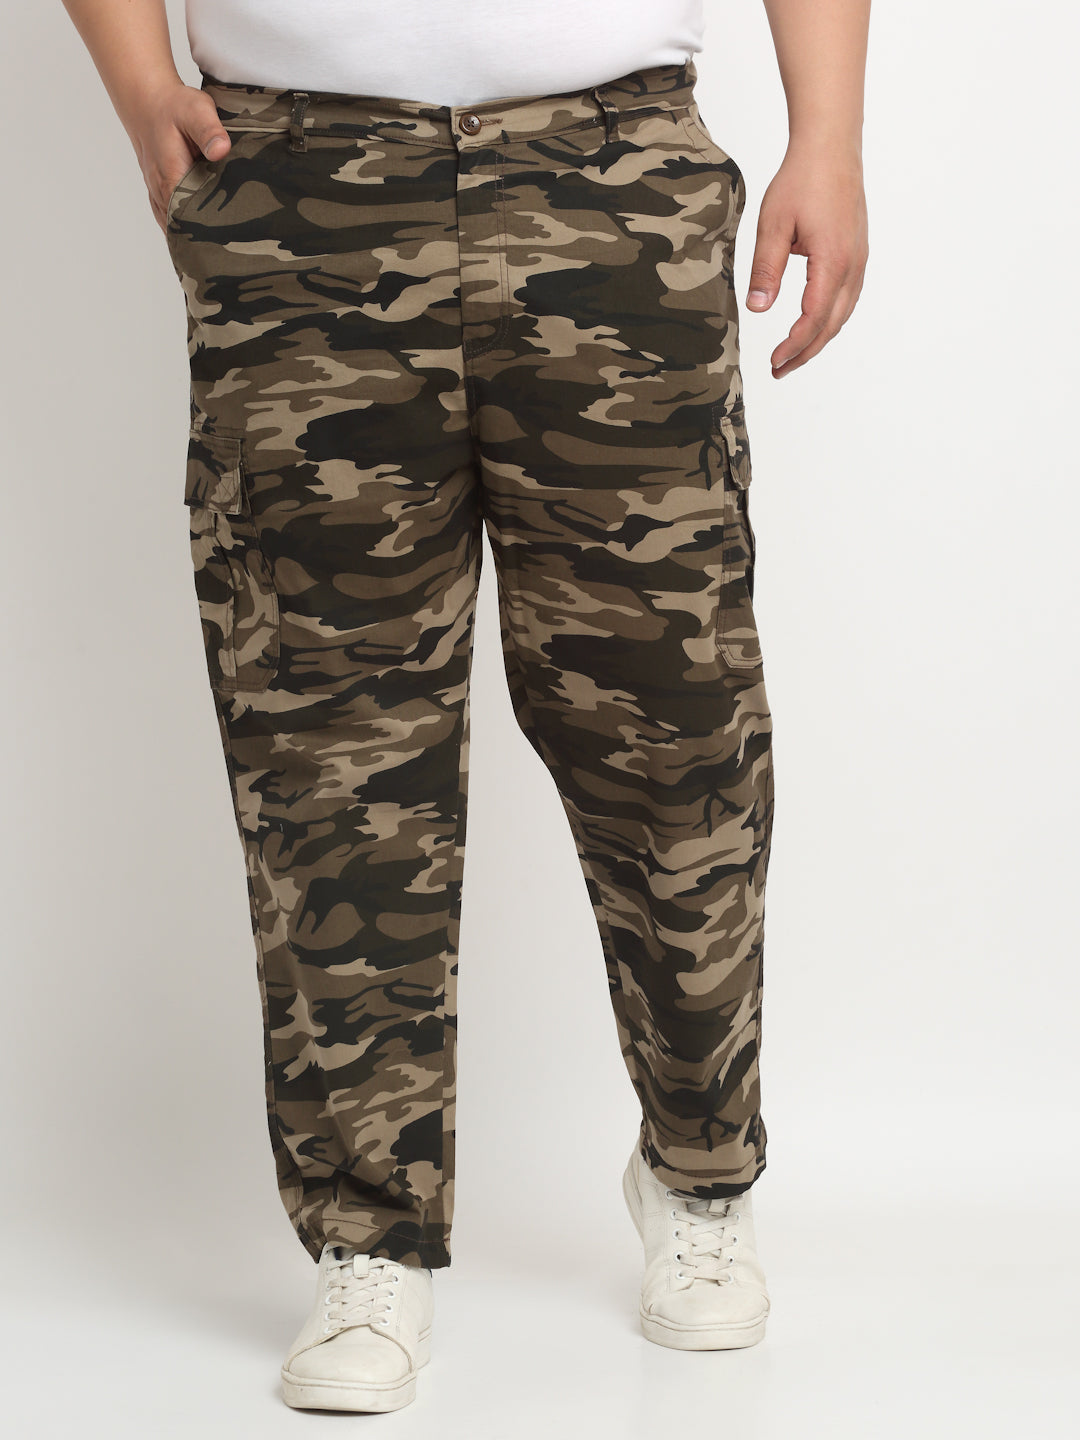 Buy Camo Premium Cargo Pants (B&T) Men's Jeans & Pants from Buyers Picks.  Find Buyers Picks fashion & more at DrJays.com